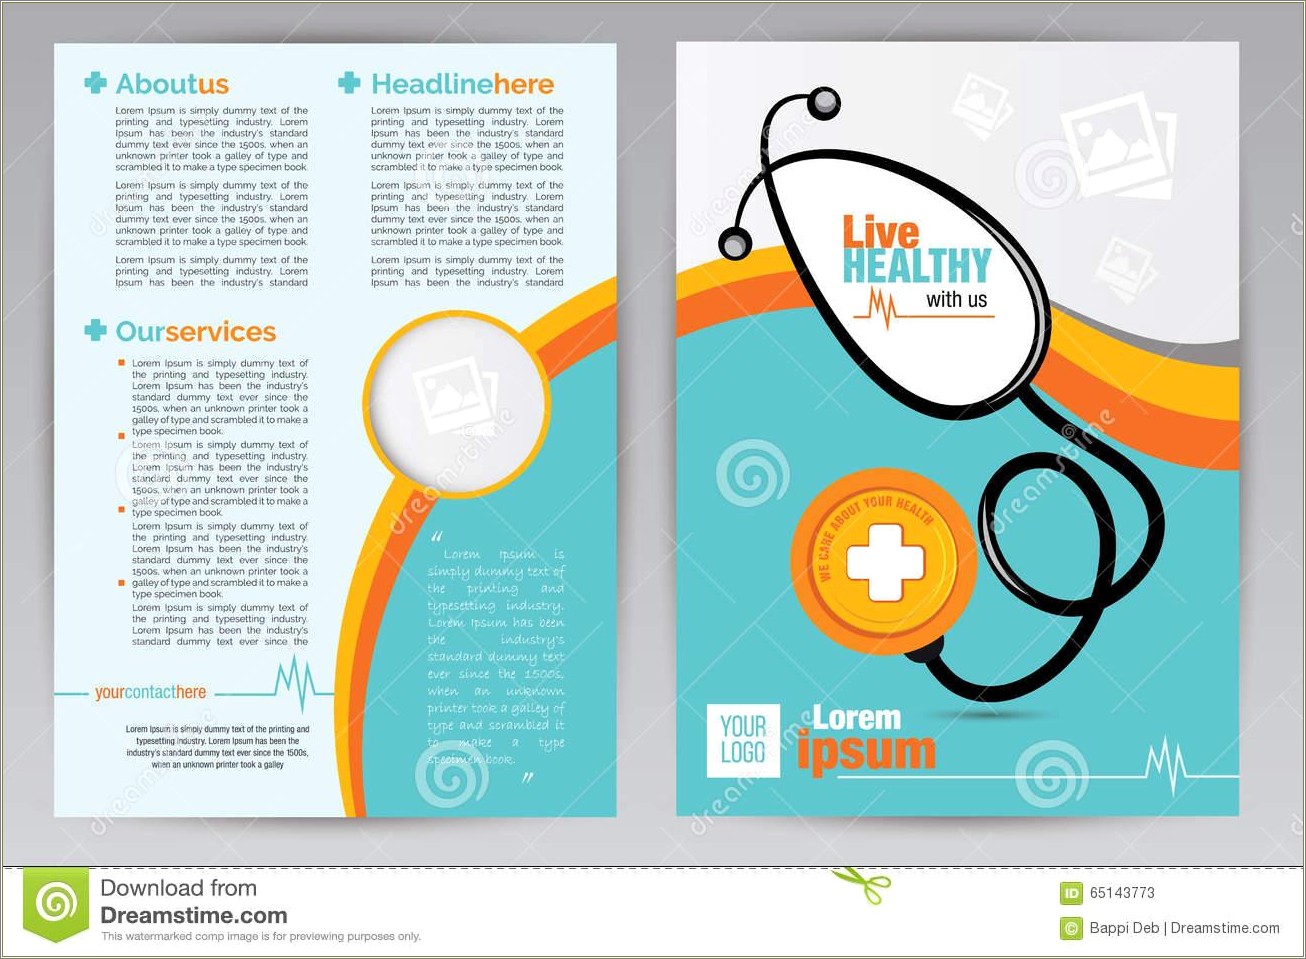 College Brochure Templates Psd Free Download